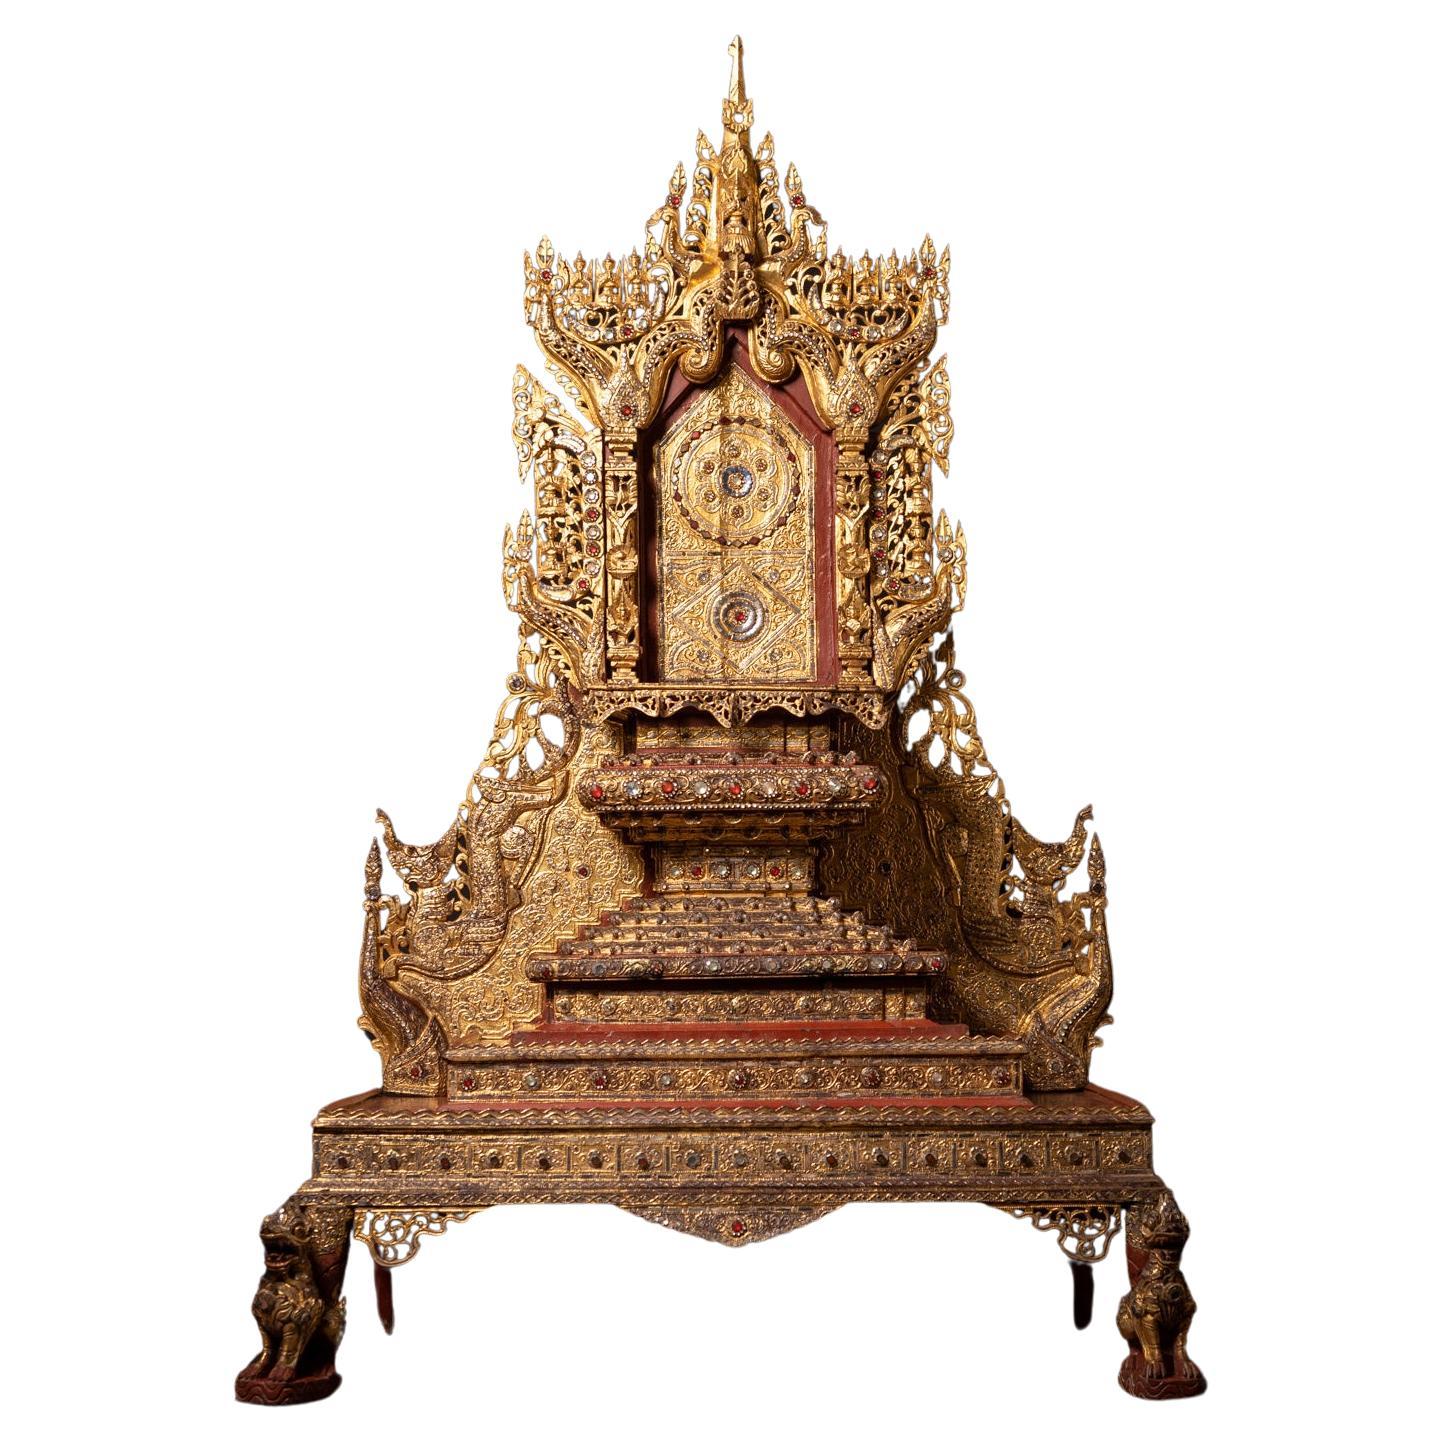 19th century Large Antique Burmese Throne from Burma For Sale